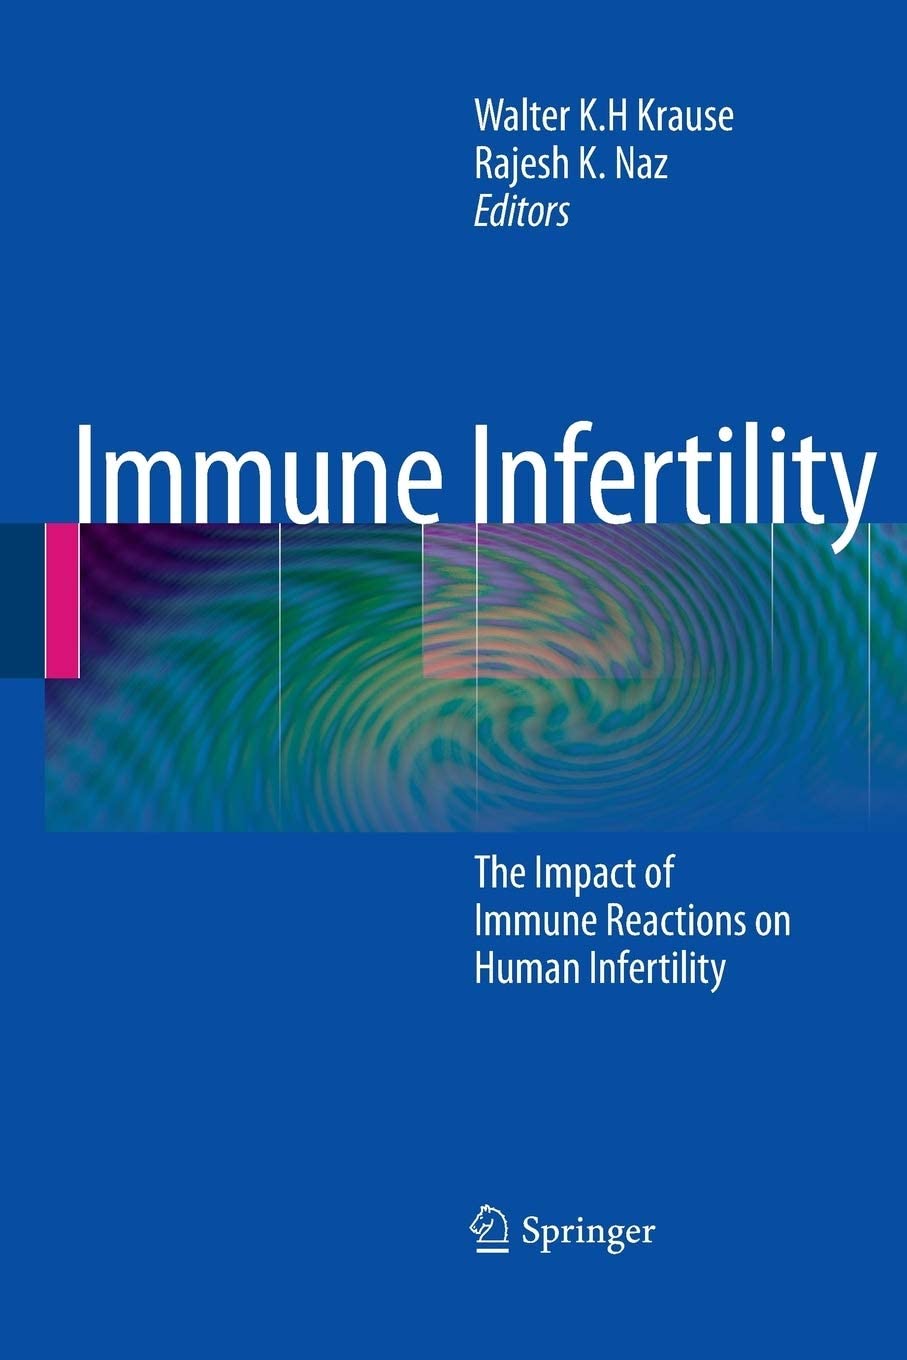 Immune Infertility: The Impact of Immune Reactions on Human Infertility